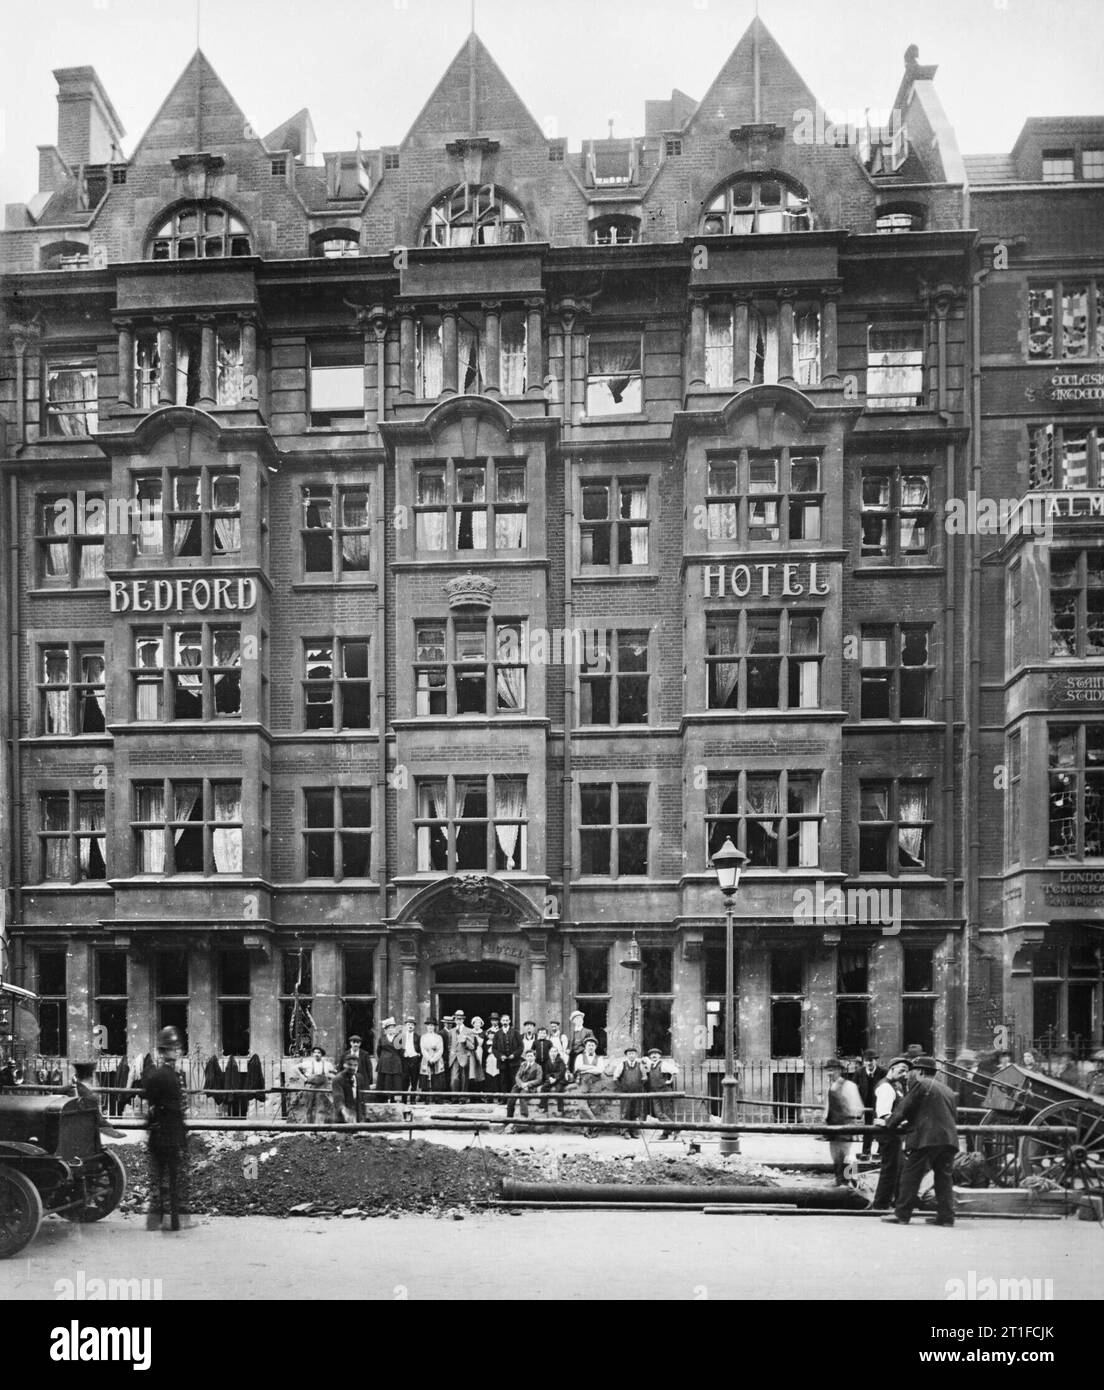 Air Raid Damage in the United Kingdom during the First World War. A group of people stand outside the Bedford Hotel on Southampton Row to watch at men at work beside a large crater. The damage was caused by a 50 kilogram bomb during a Gotha raid on the night of 24 - 25 September 1917. Stock Photo